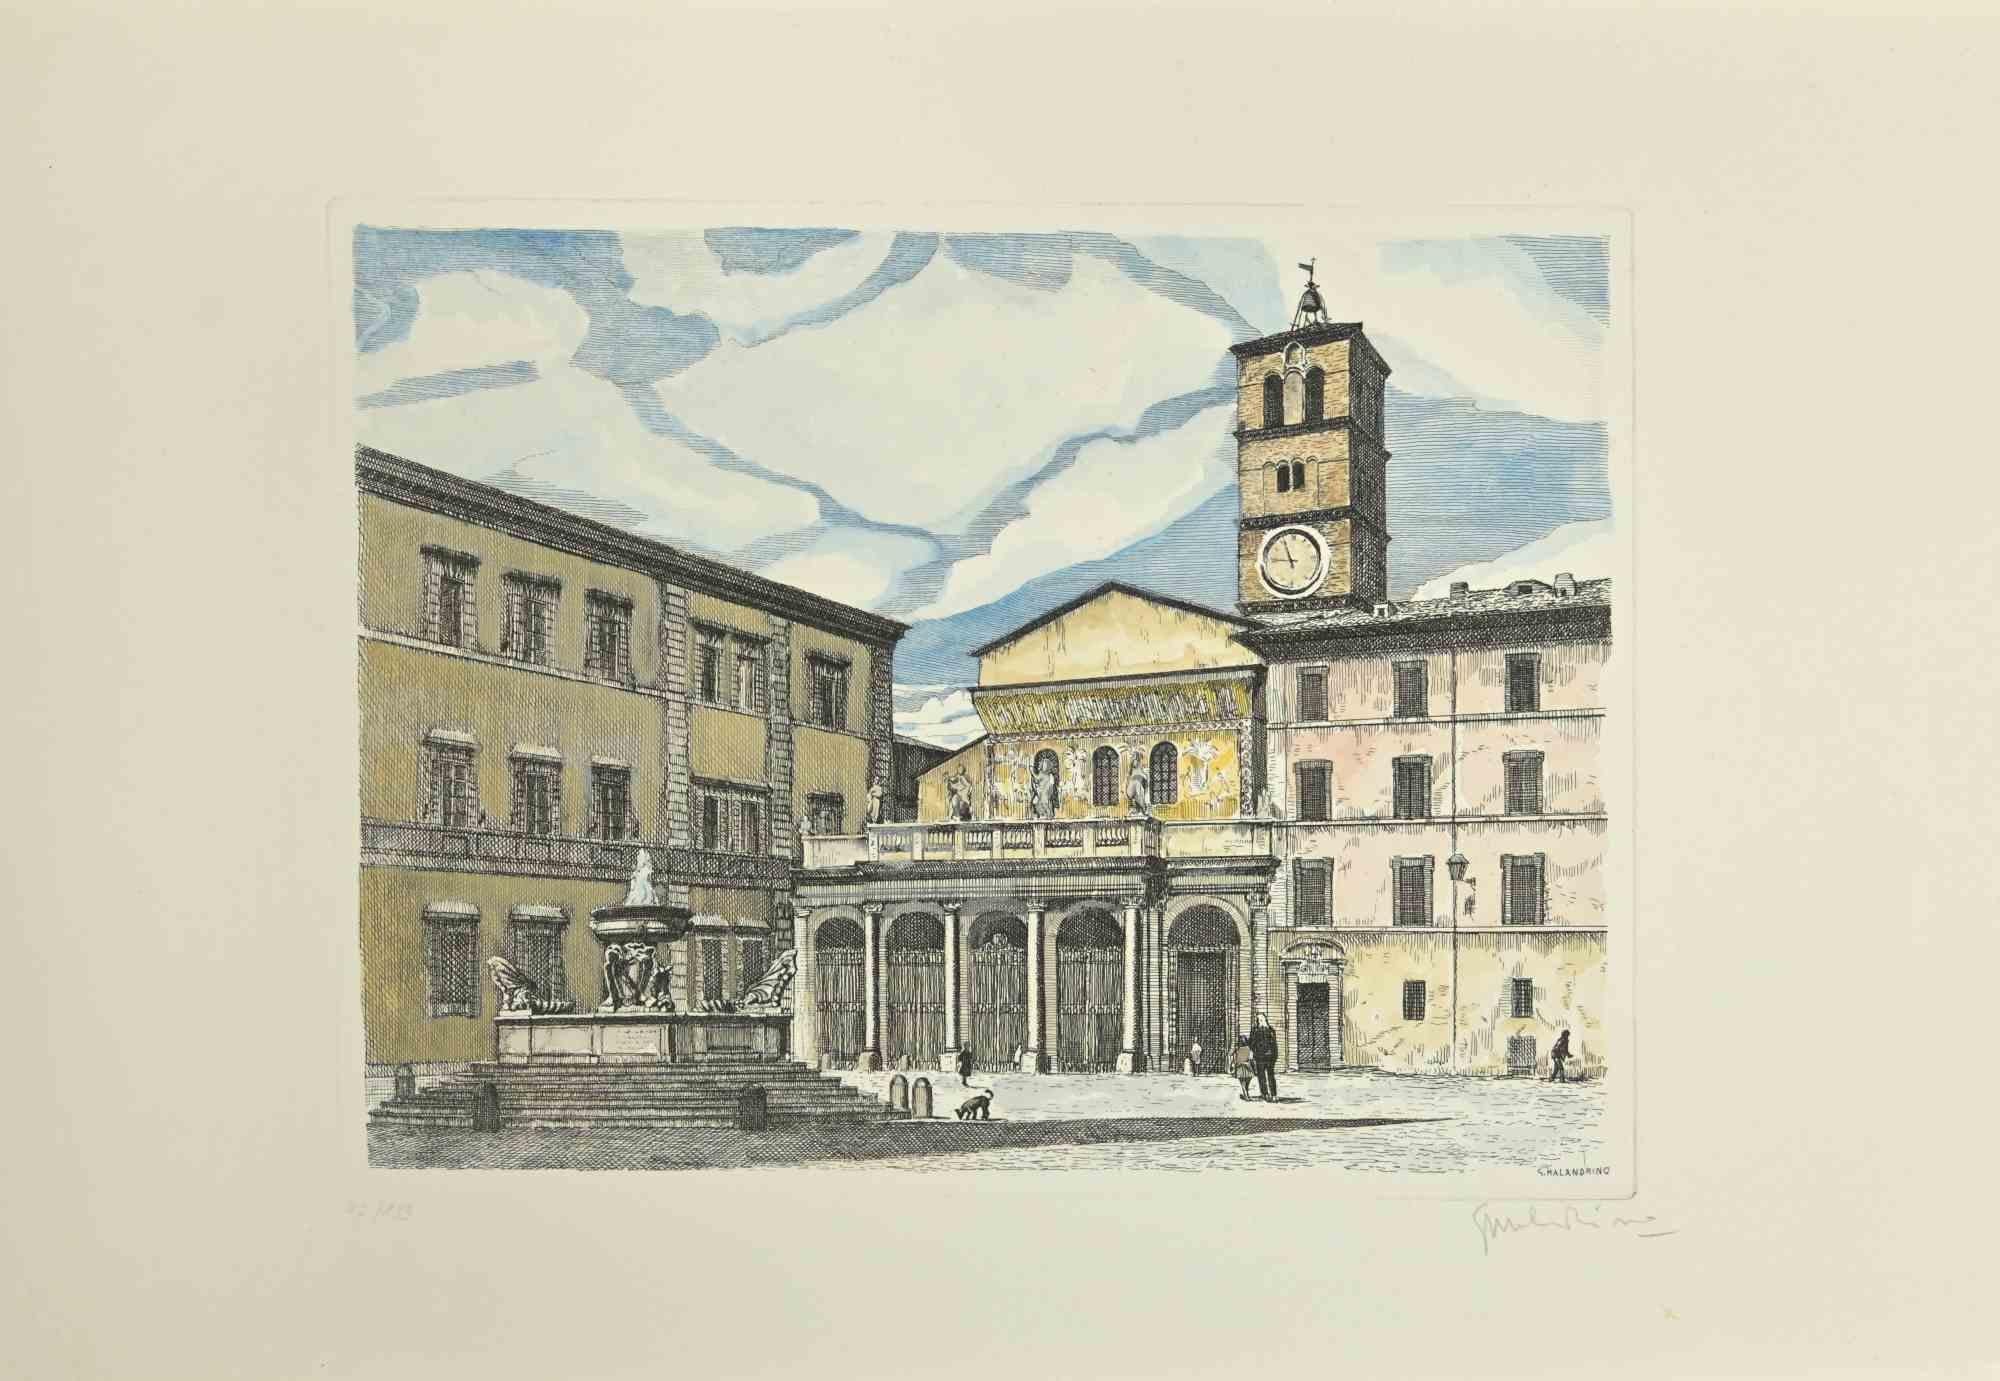 Roman View is an artwork realized by Giuseppe Malandrino.

Print in etching technique and hand watercolored.

Hand-signed by the artist in pencil on the lower right corner.

Numbered edition,75/199.

Good condition.

This artwork represents the